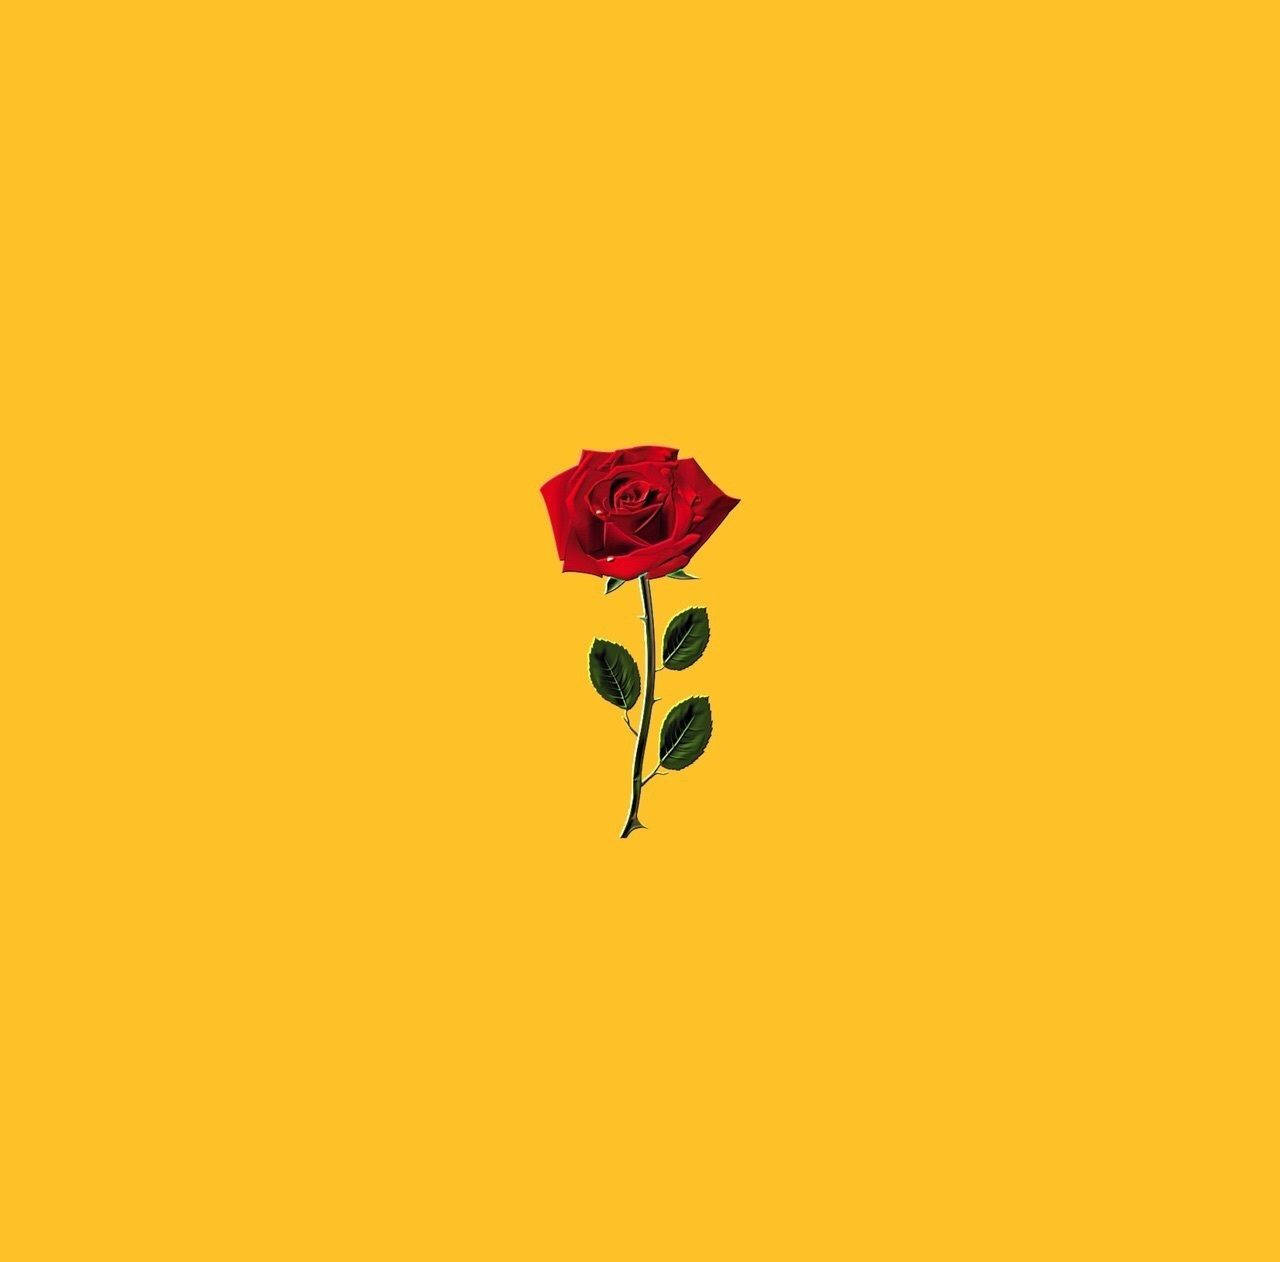 Red Rose For Cute Yellow Background Background